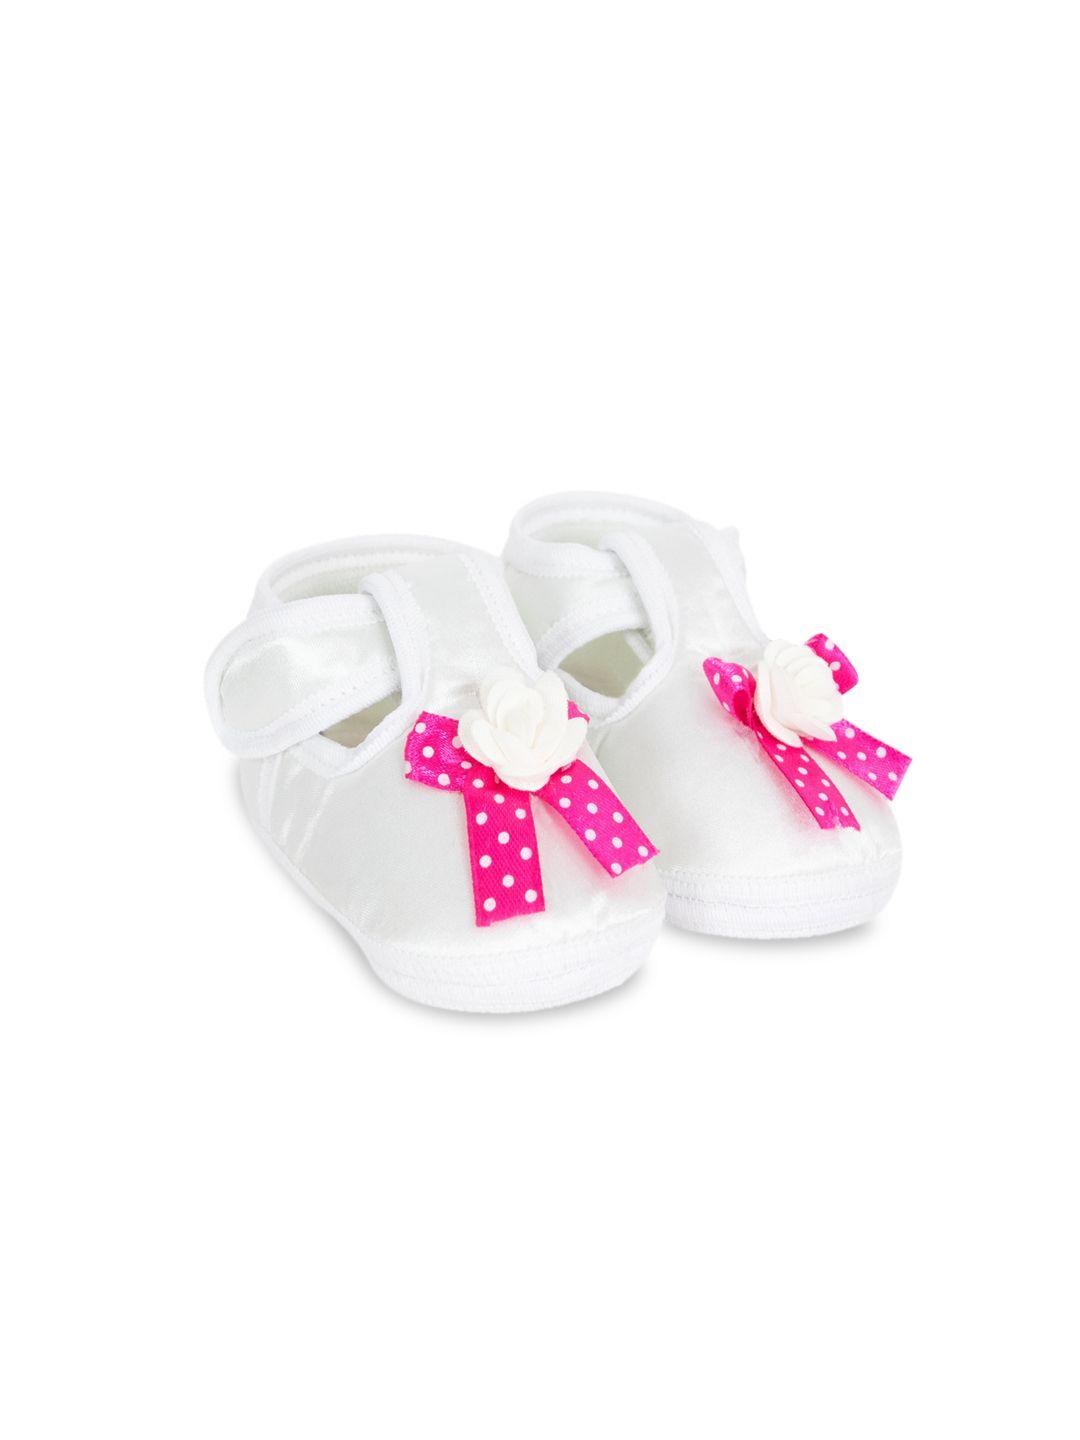 baesd infant girls bow embellished satin booties